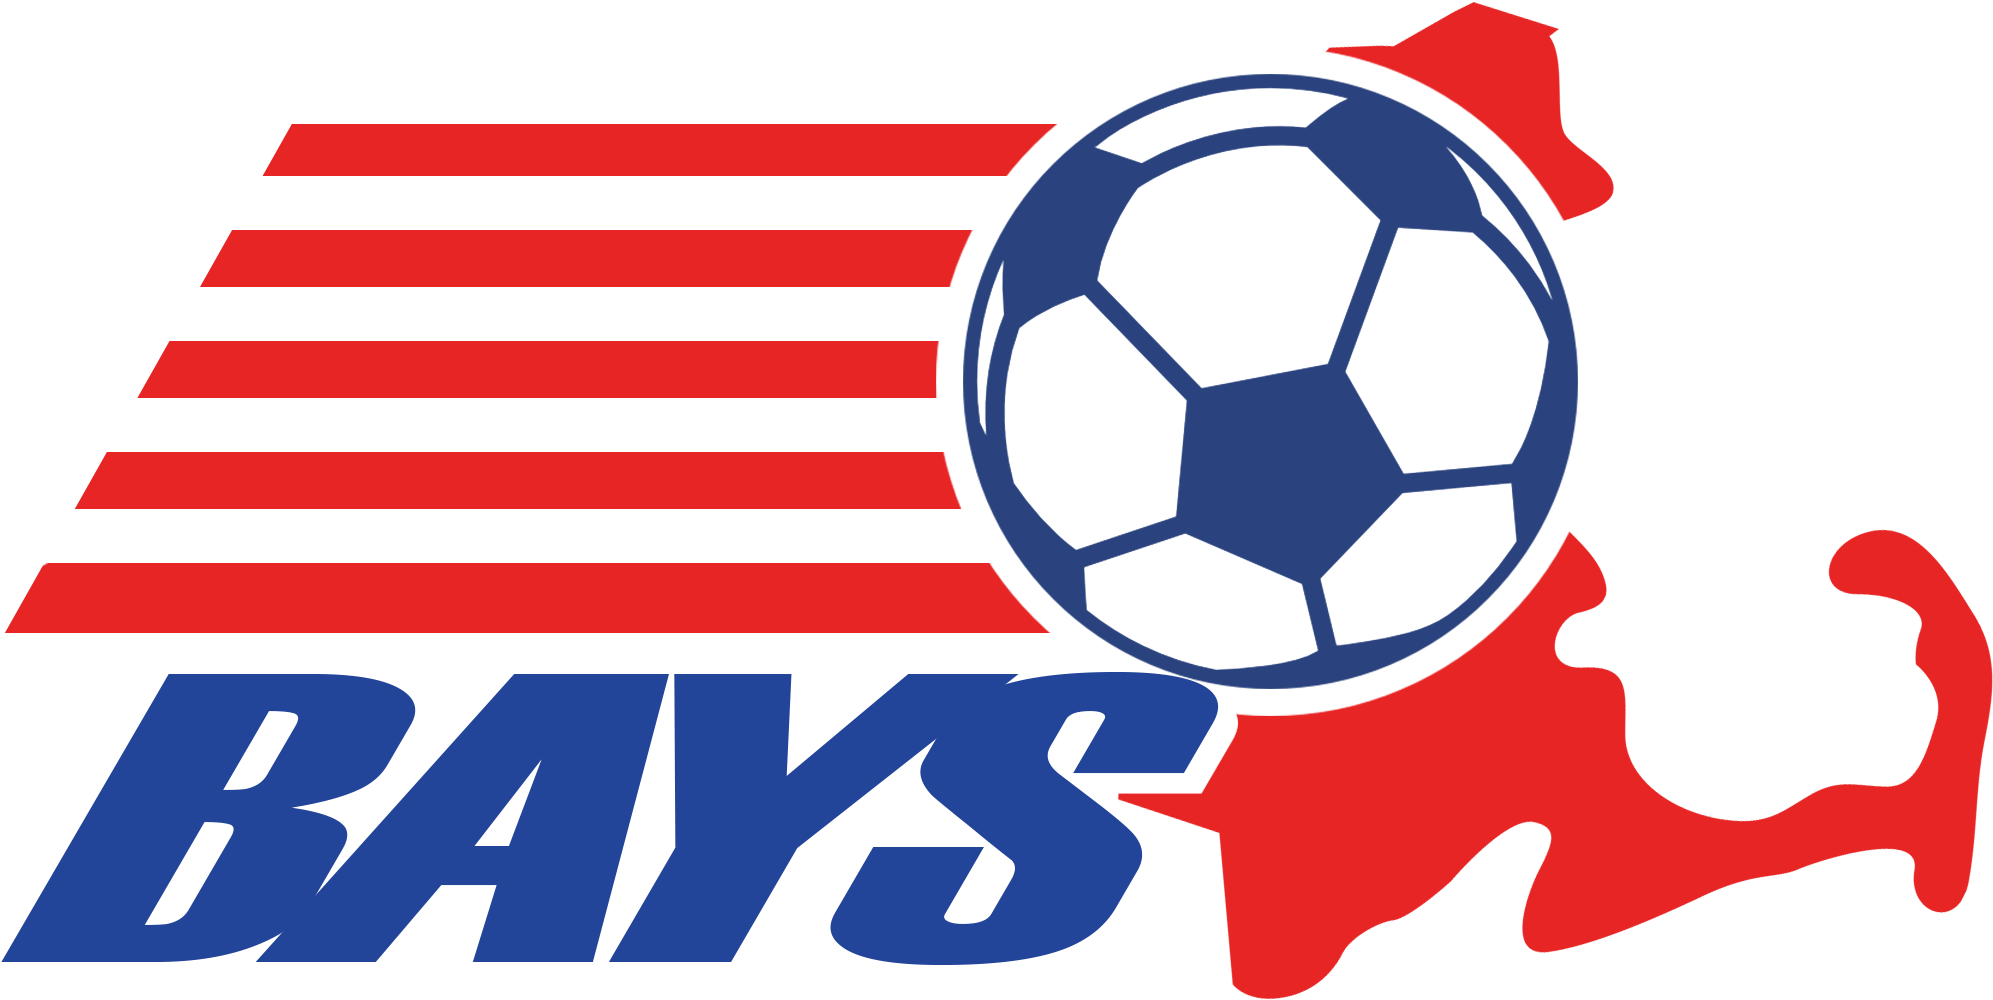 Boston Area Youth Soccer - Aff Championship (2000x1200)